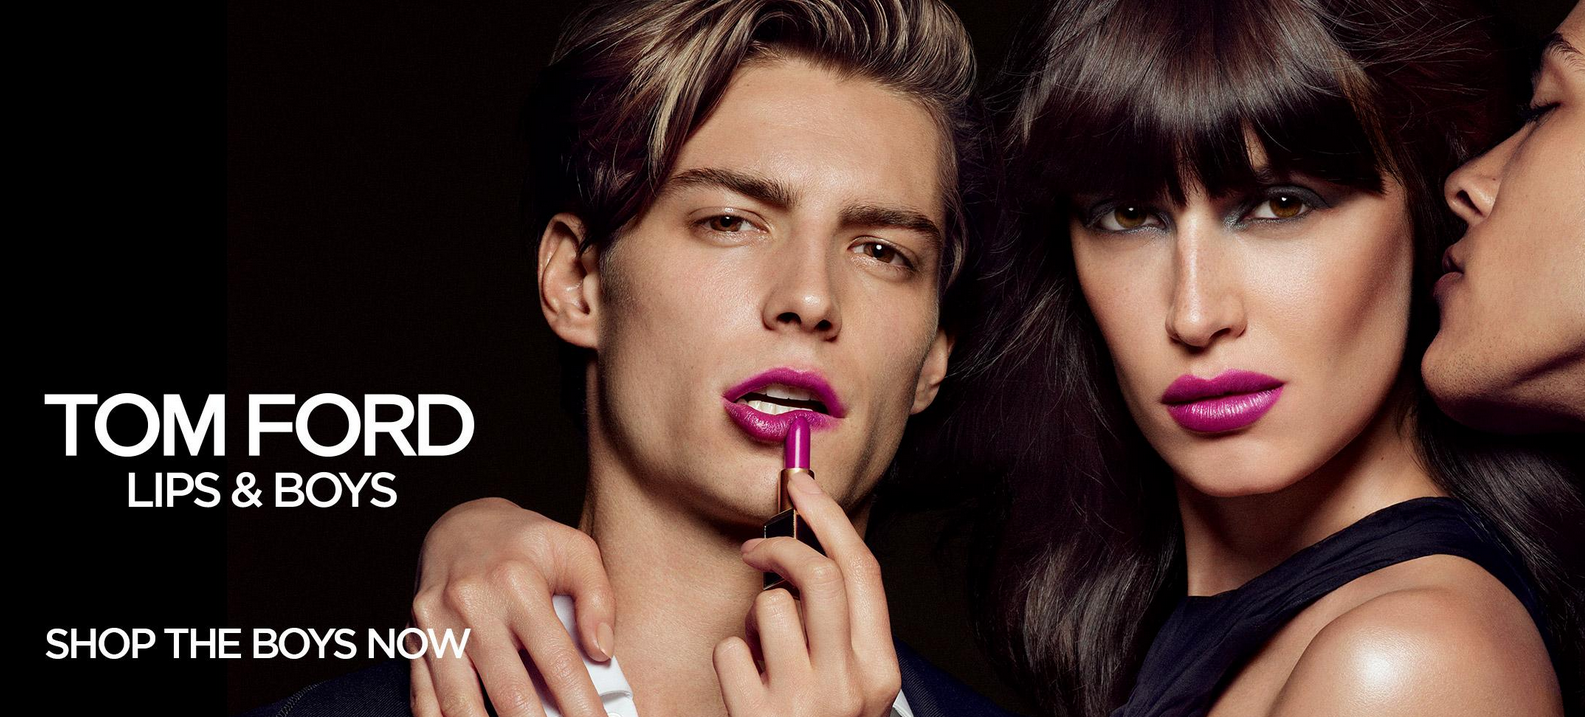 CYBER MONDAY: TOM FORD BEAUTY LIPS & BOYS LIP COLOR COLLECTION AVAILABLE! featured image